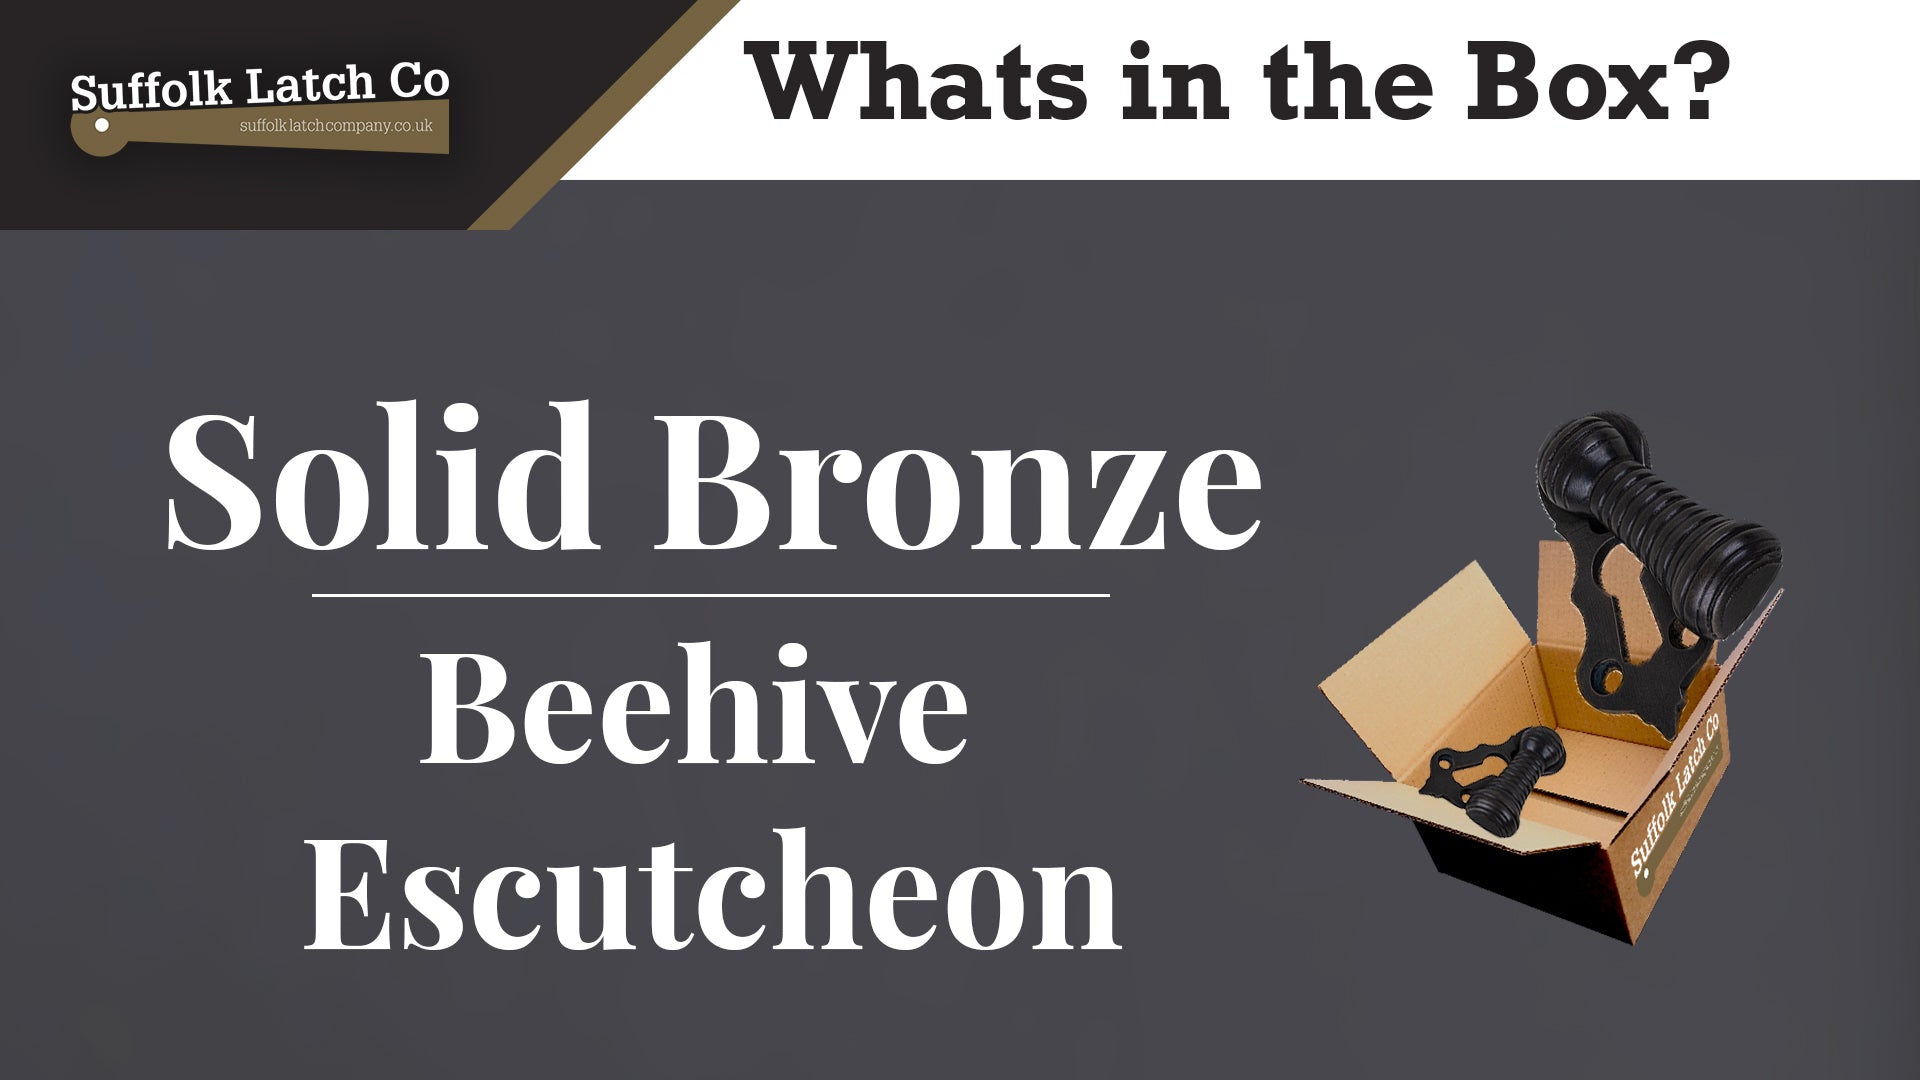 What's in the Box: Beehive Escutcheon